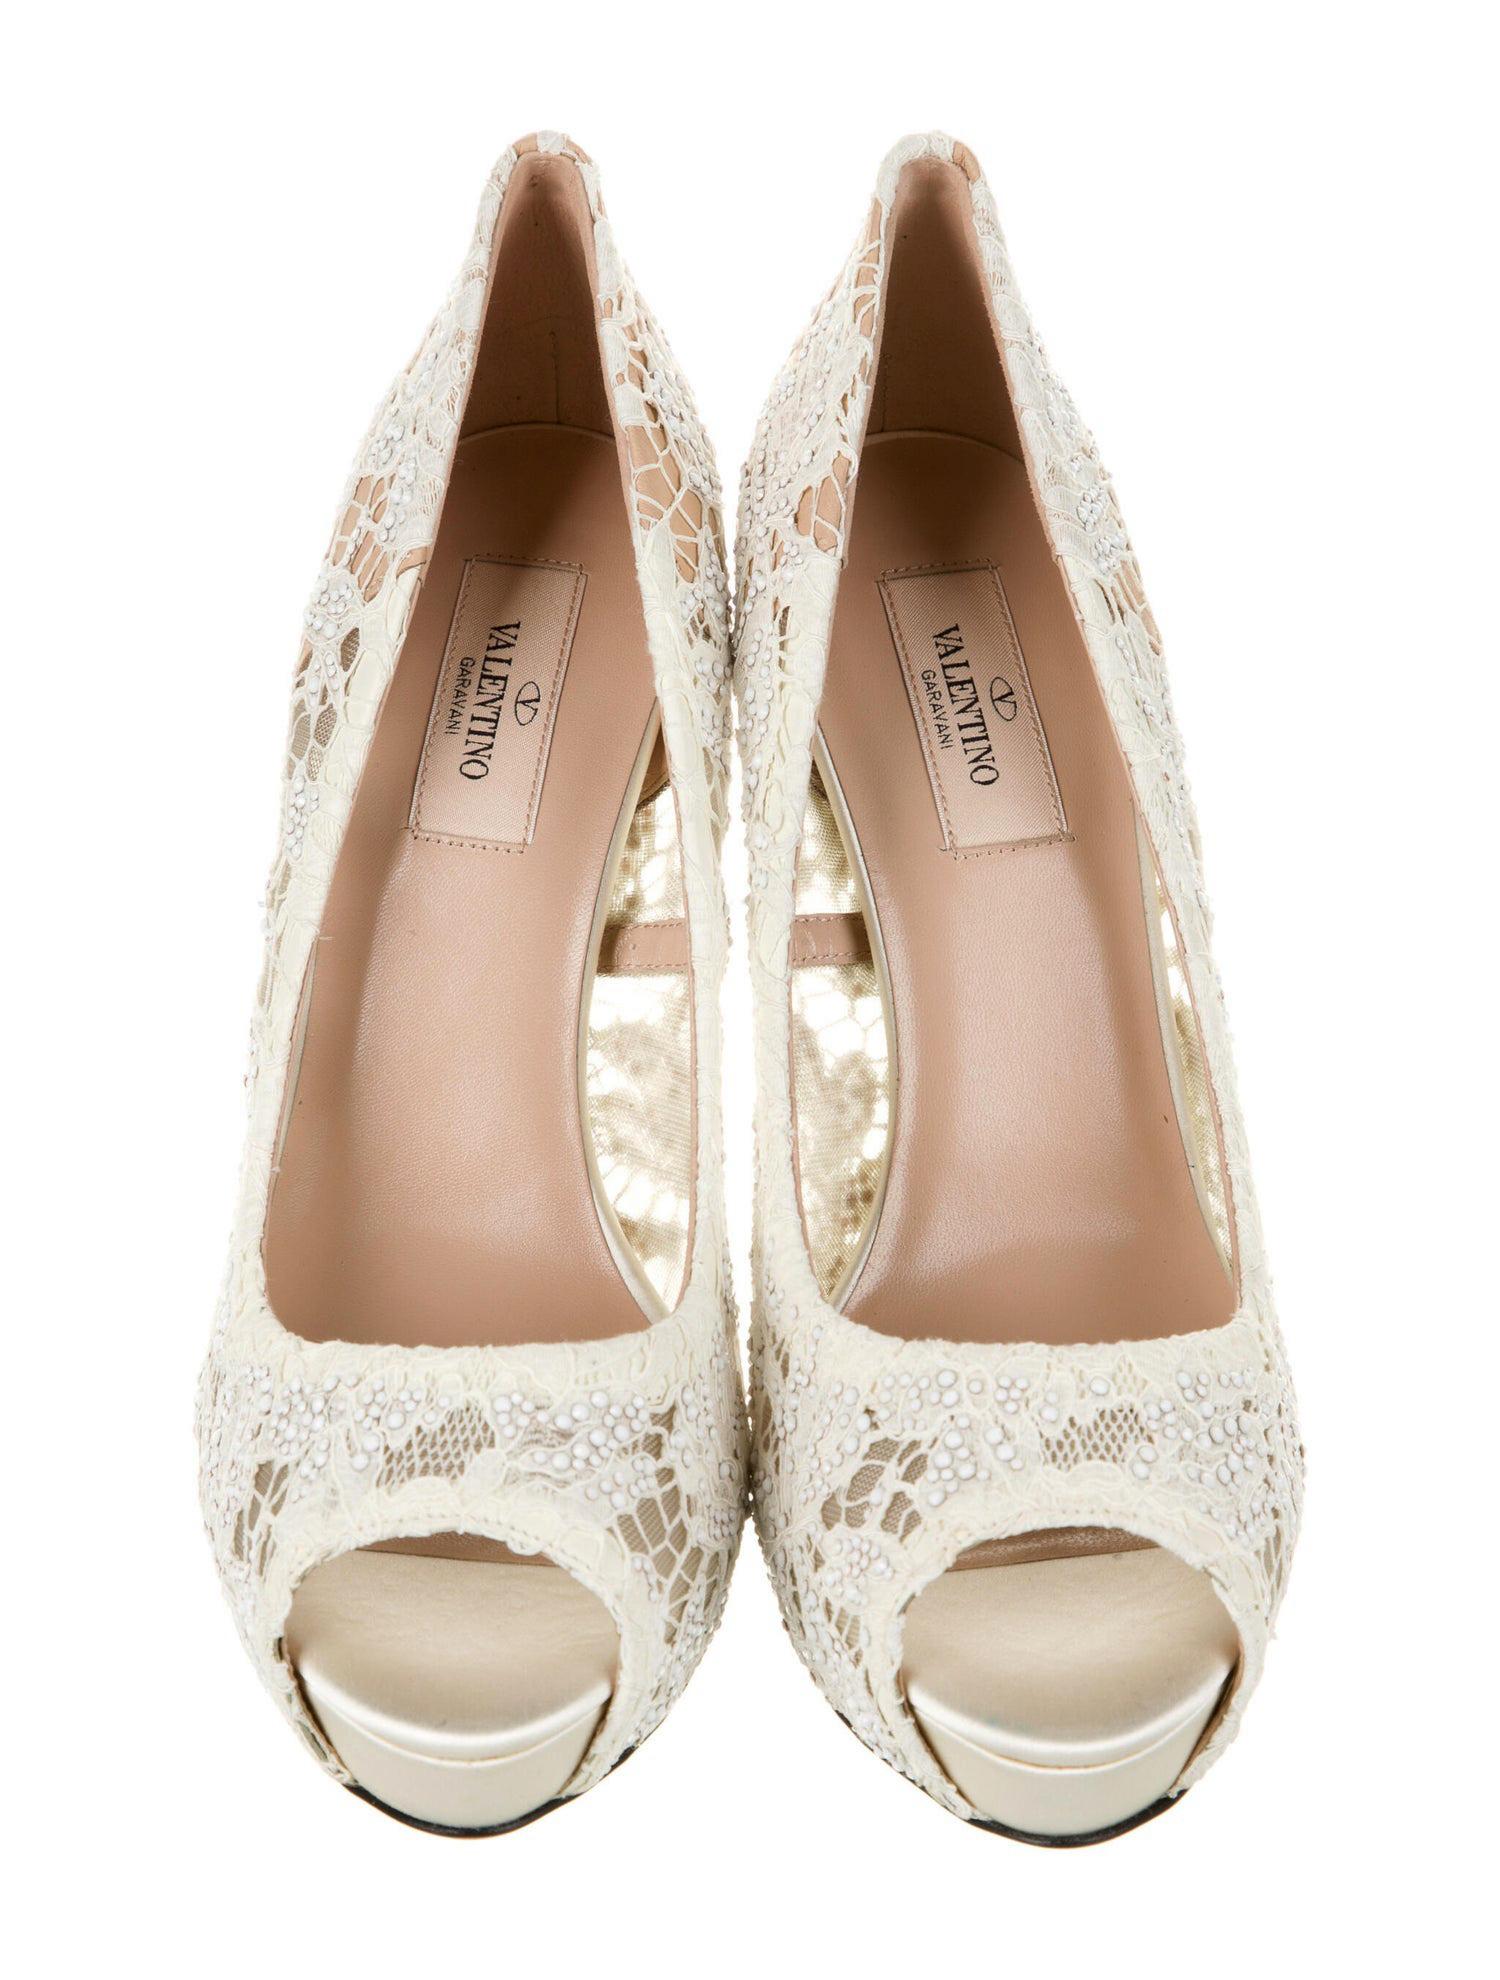 New Valentino Garavani Lace Embellished Pumps Shoes
Designer size 39.5 - US 9.5
Off - White Lace Floral Pattern, Finished with White Sparkle Crystals, Satin Stiletto Heel, Leather Insole & Sole.
Heel Height - 5 inches, Platform - 1 inch.
Made in